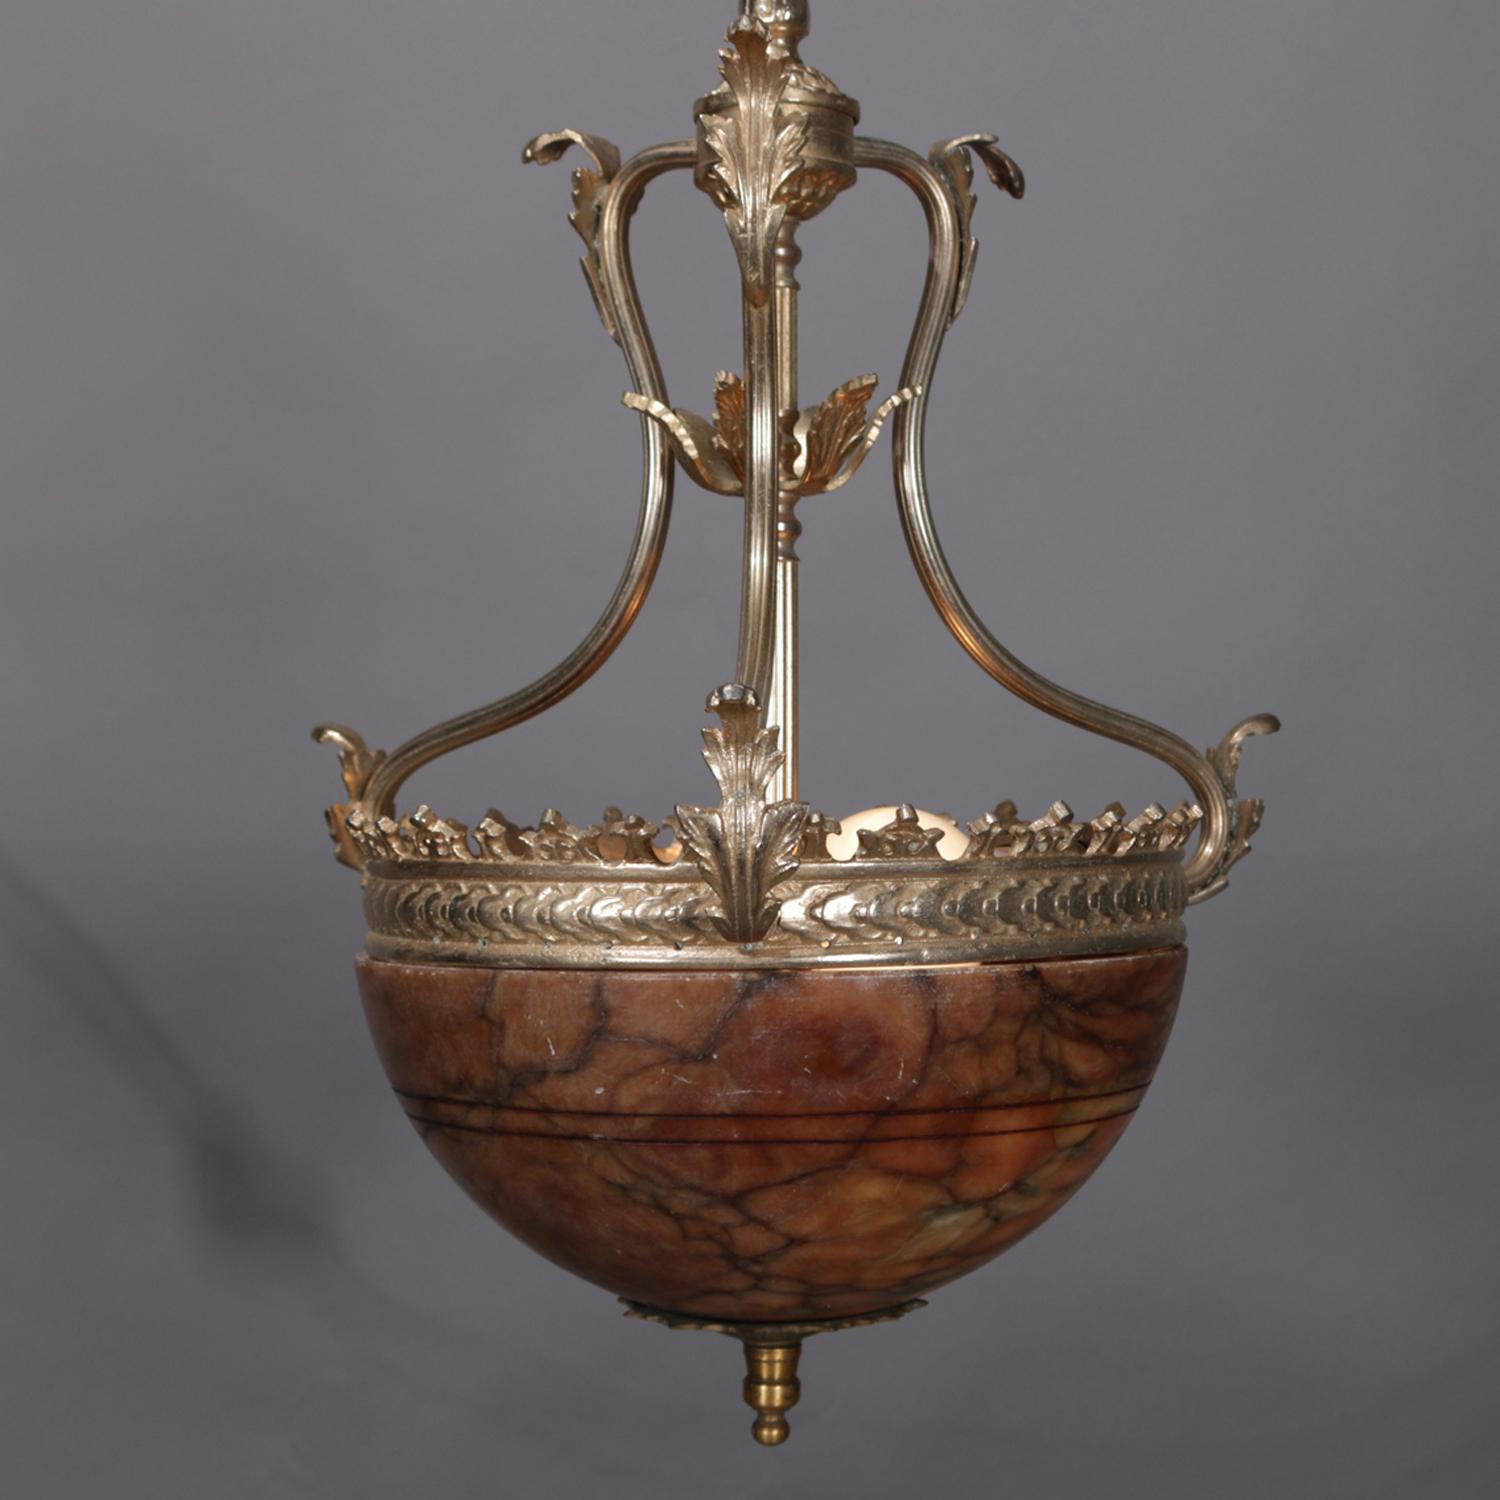 A vintage French style pendant light features gilt bronze crown form frame with foliate attachments and supporting marble bowl, professionally rewired and working, circa 1930.

Measures: 37